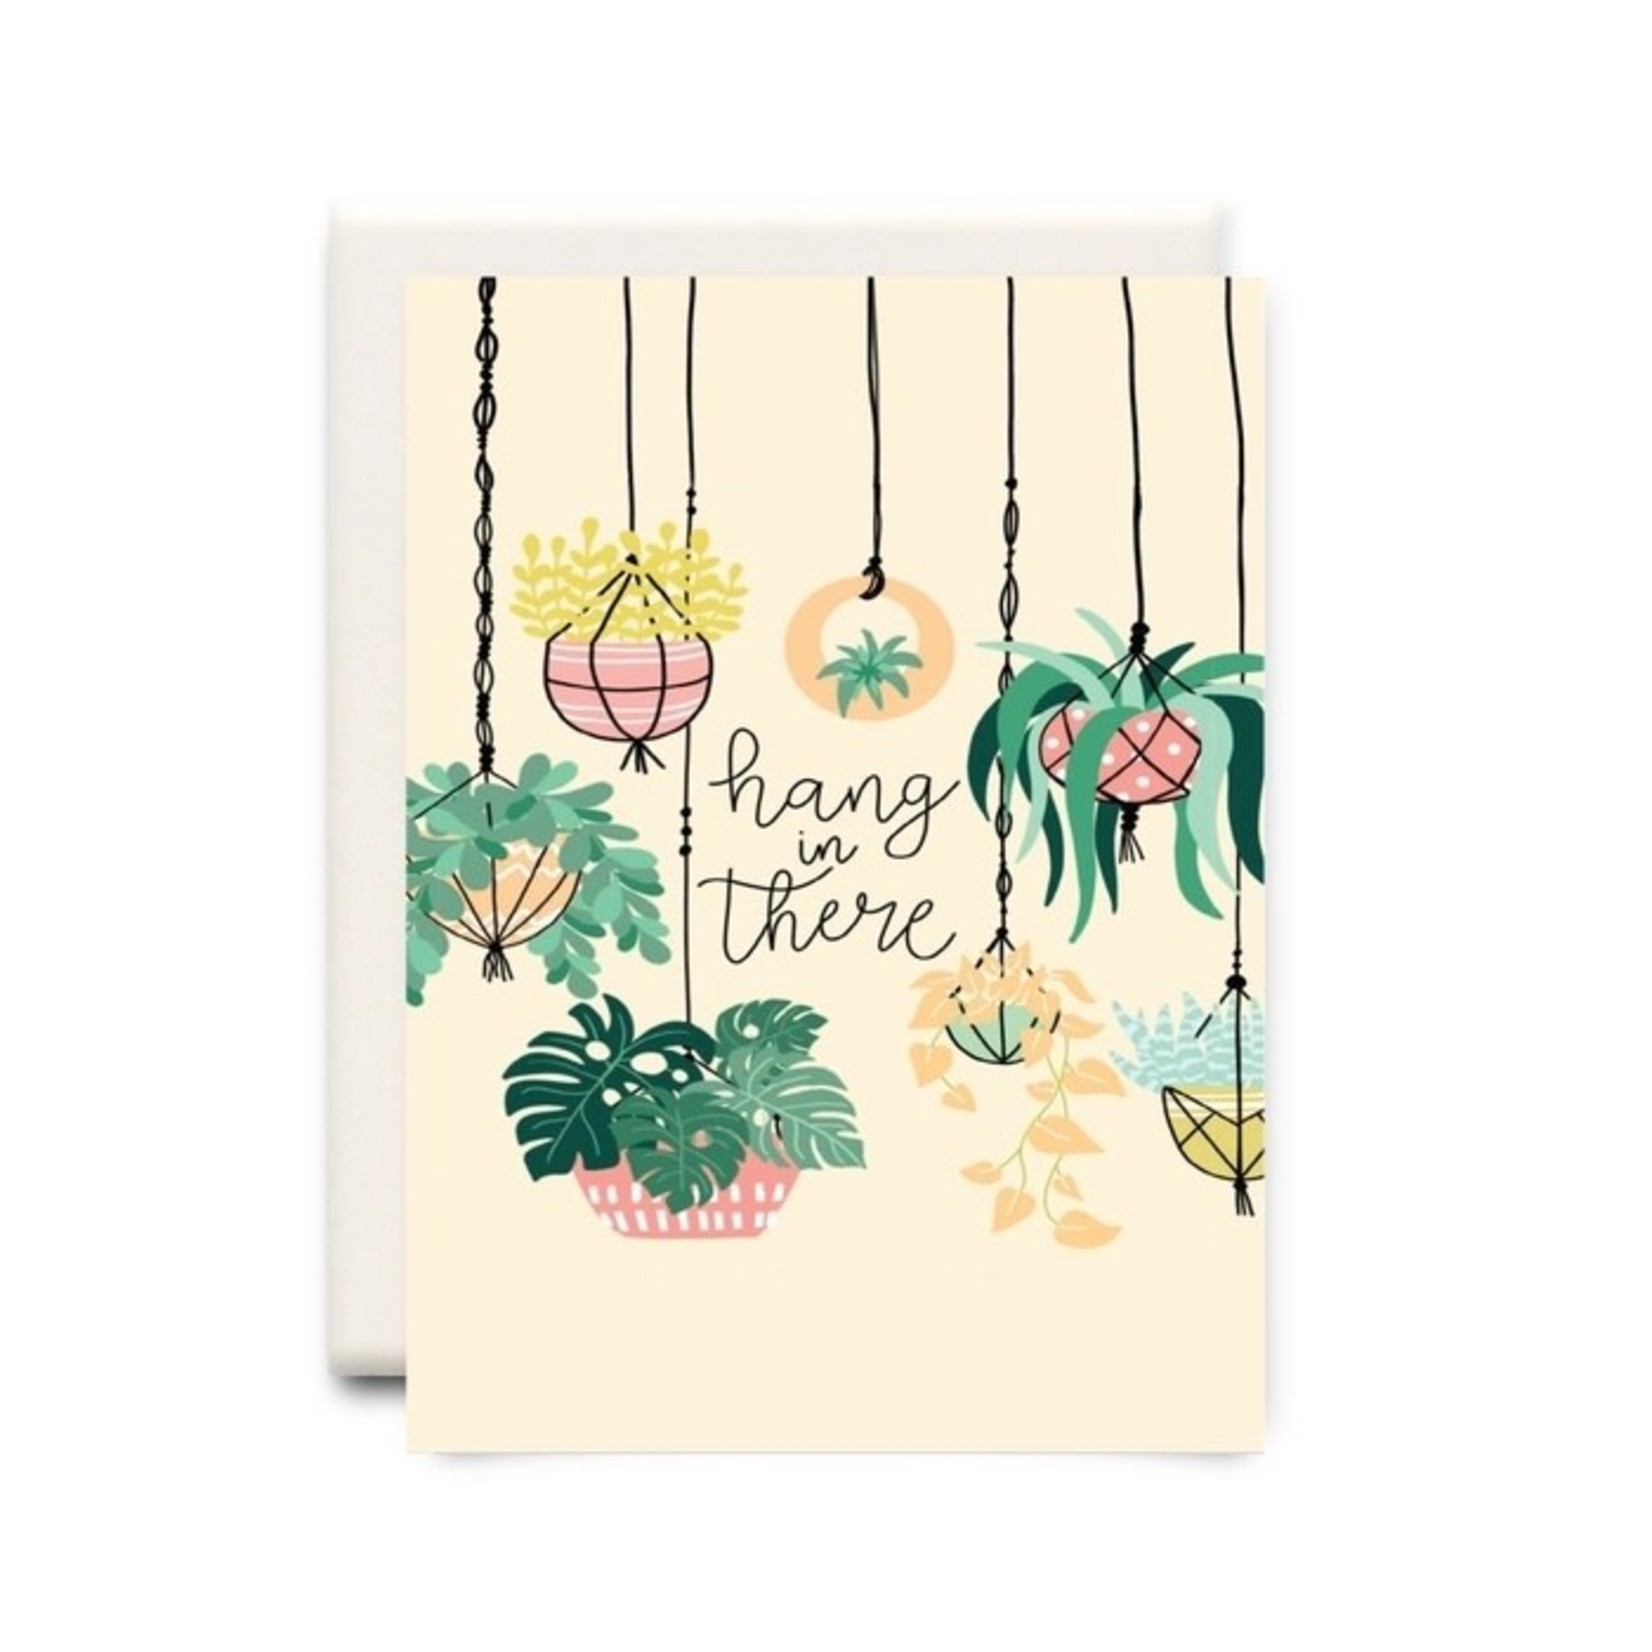 Hang in There - Greeting Card